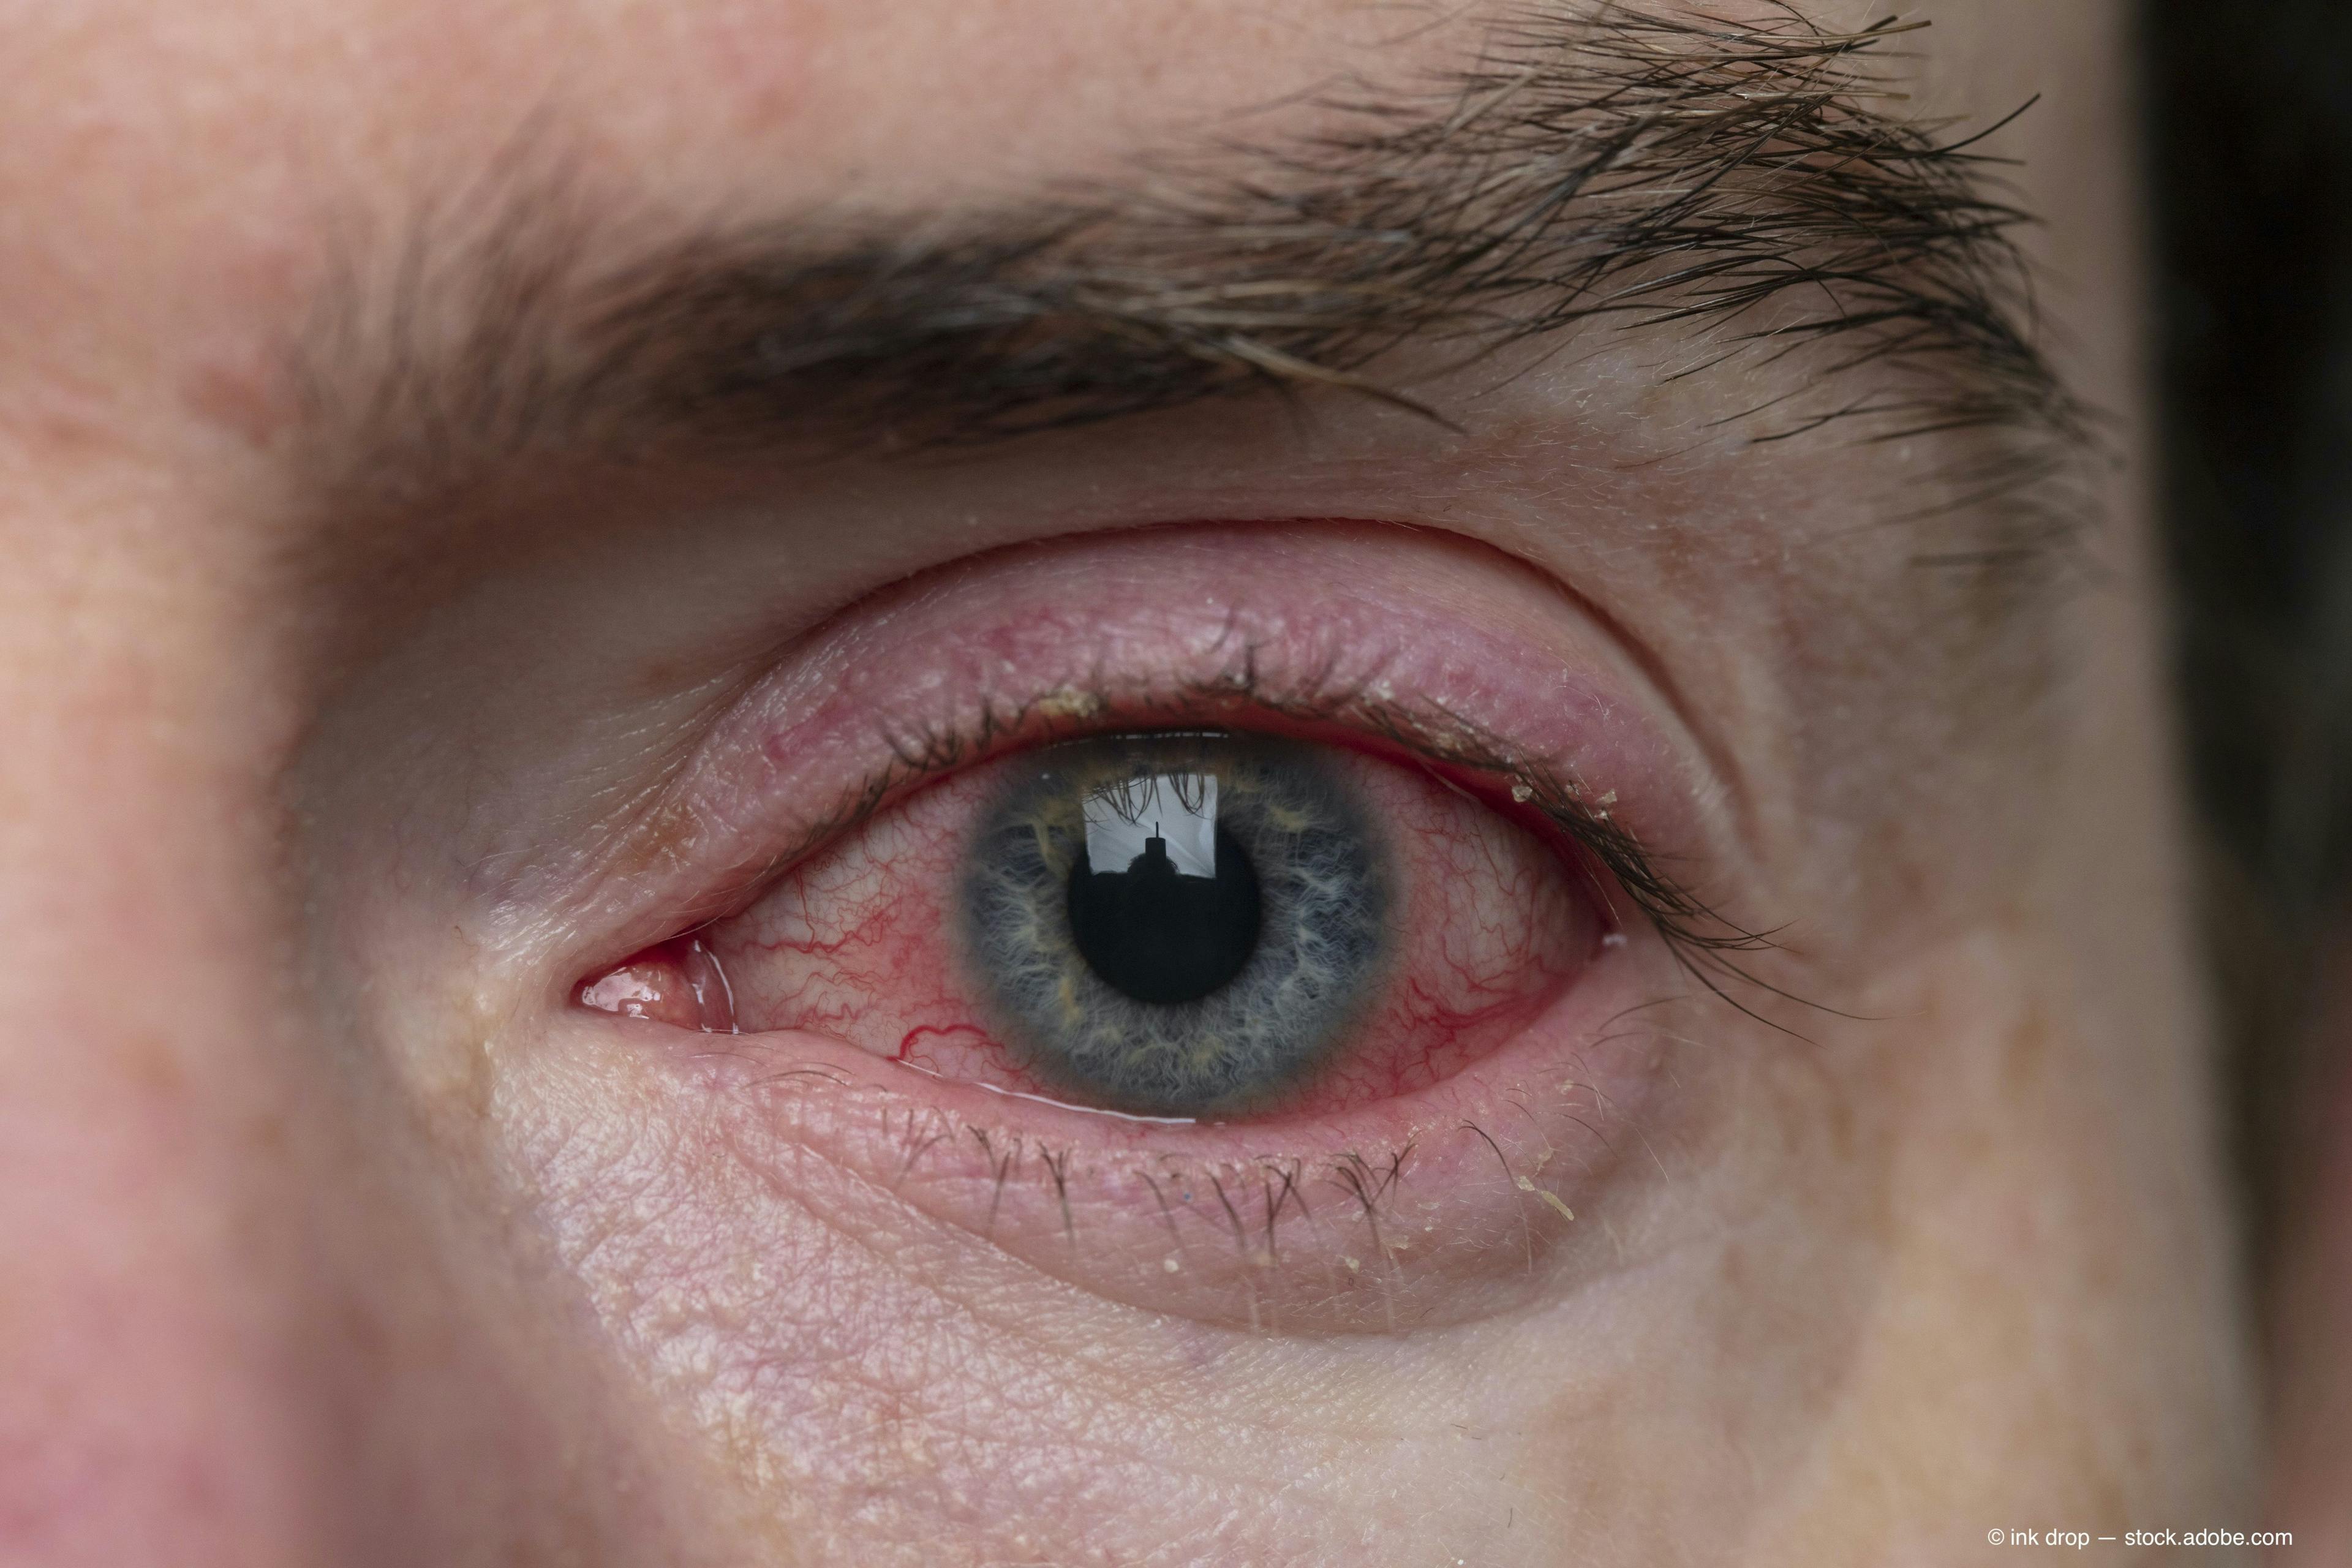 pink eye has been found to be a possible symptom of coronavirus